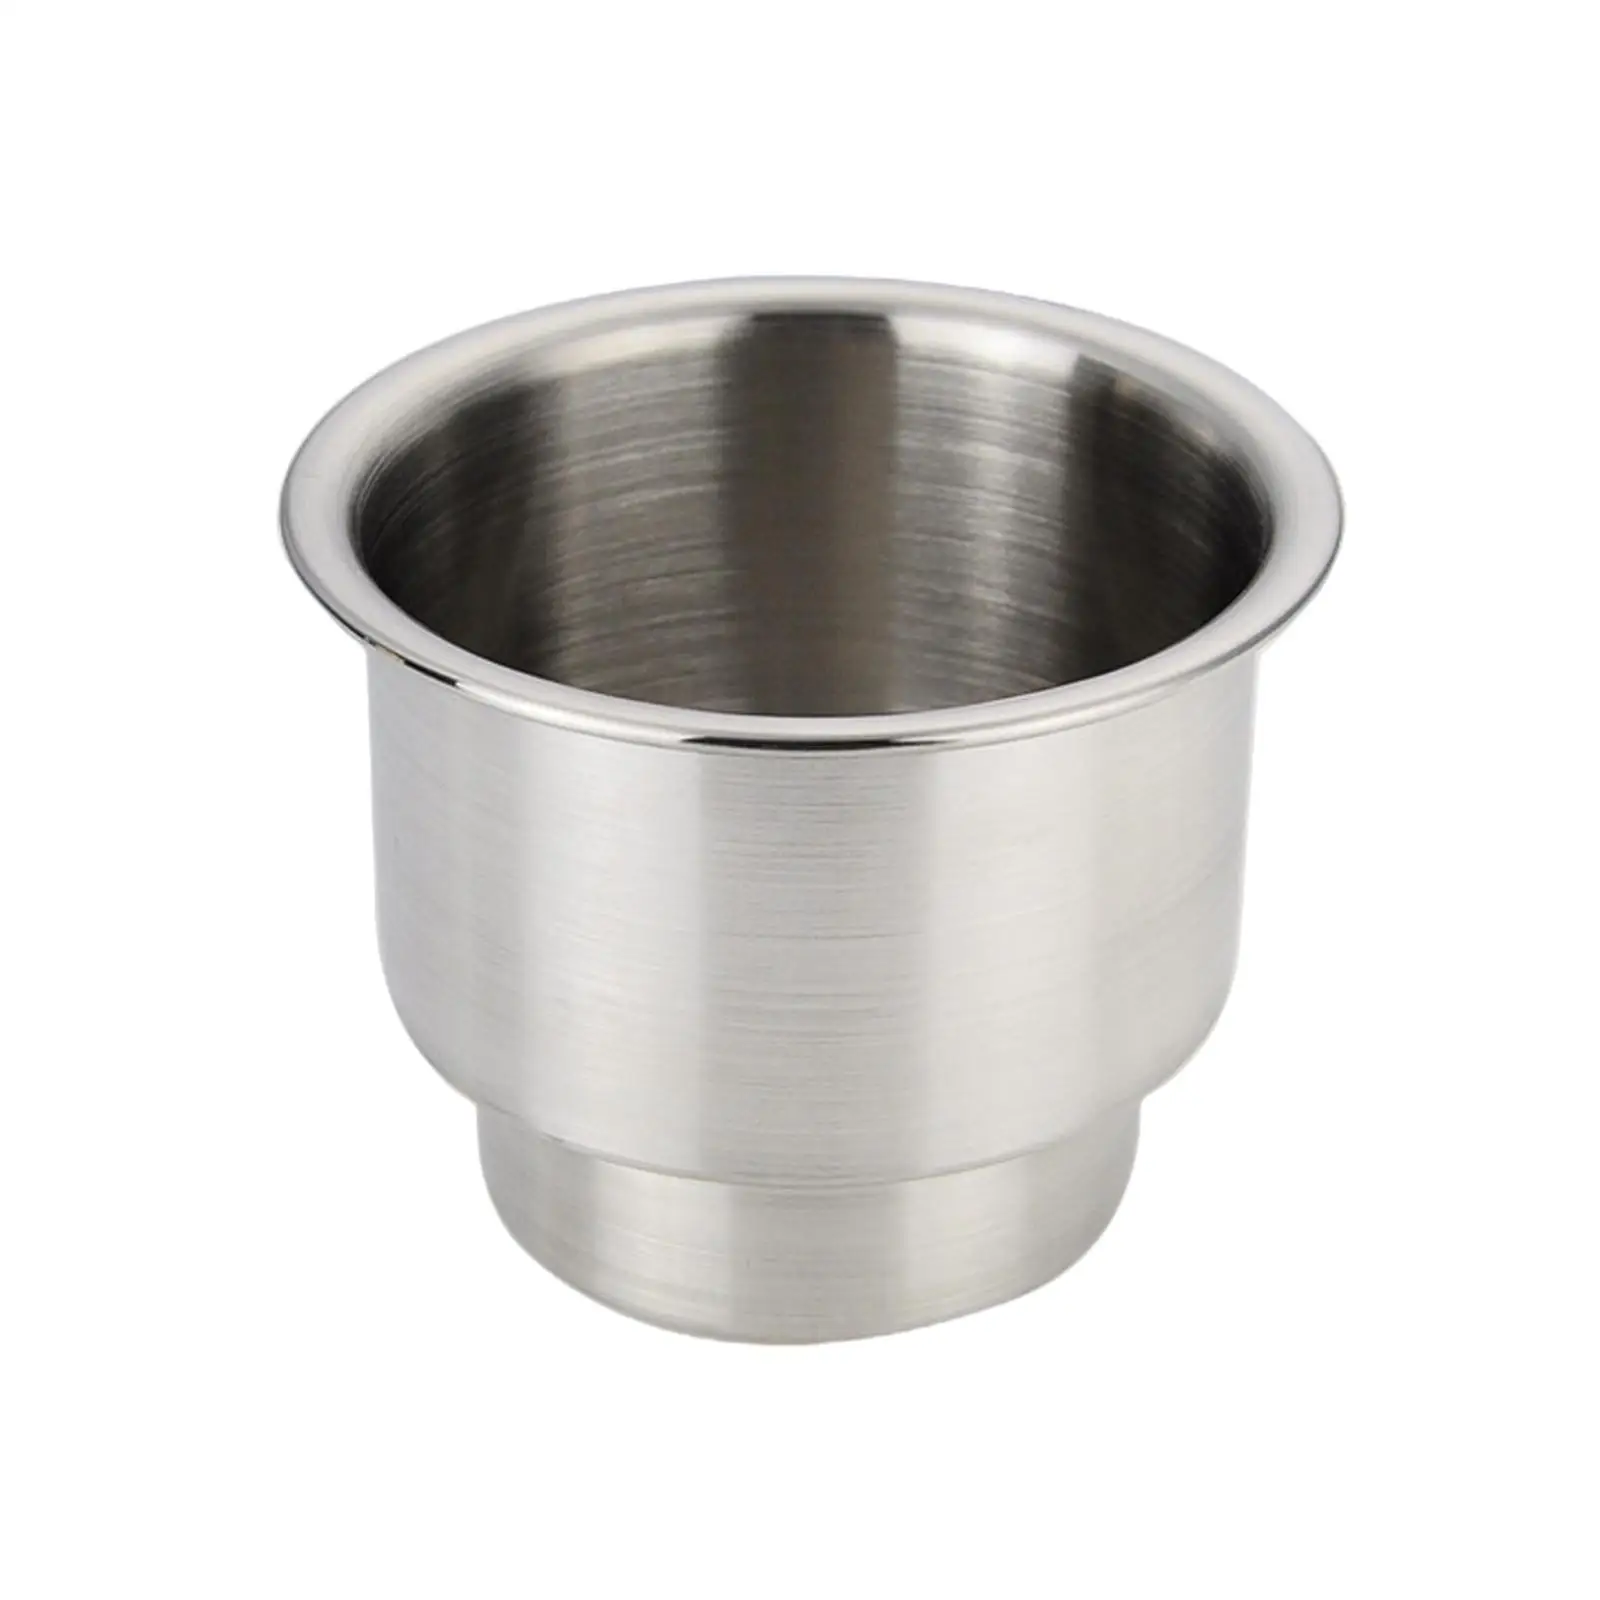 Cup Drink Holder Stainless Steel Recessed Drink Water Bottle Holder Fit for Camper Boat Marine Silver Color 110x83mm